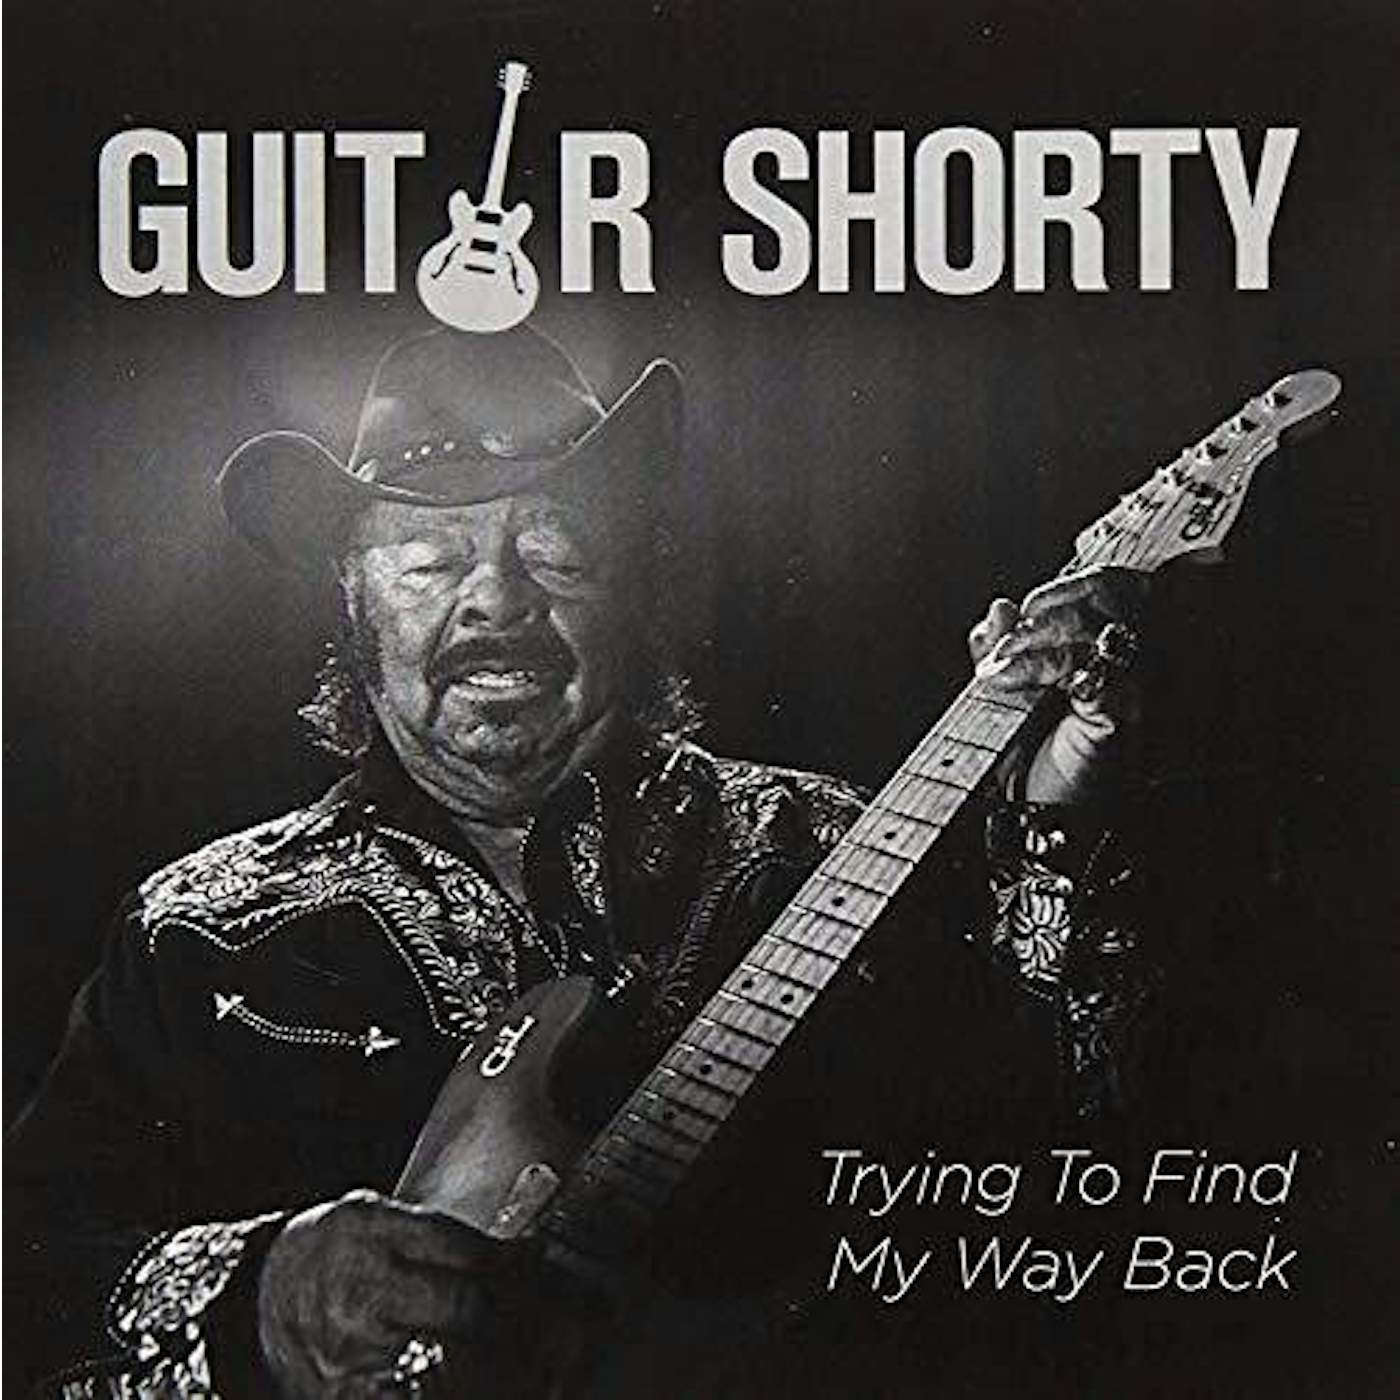 Guitar Shorty TRYING TO FIND MY WAY BACK DVD